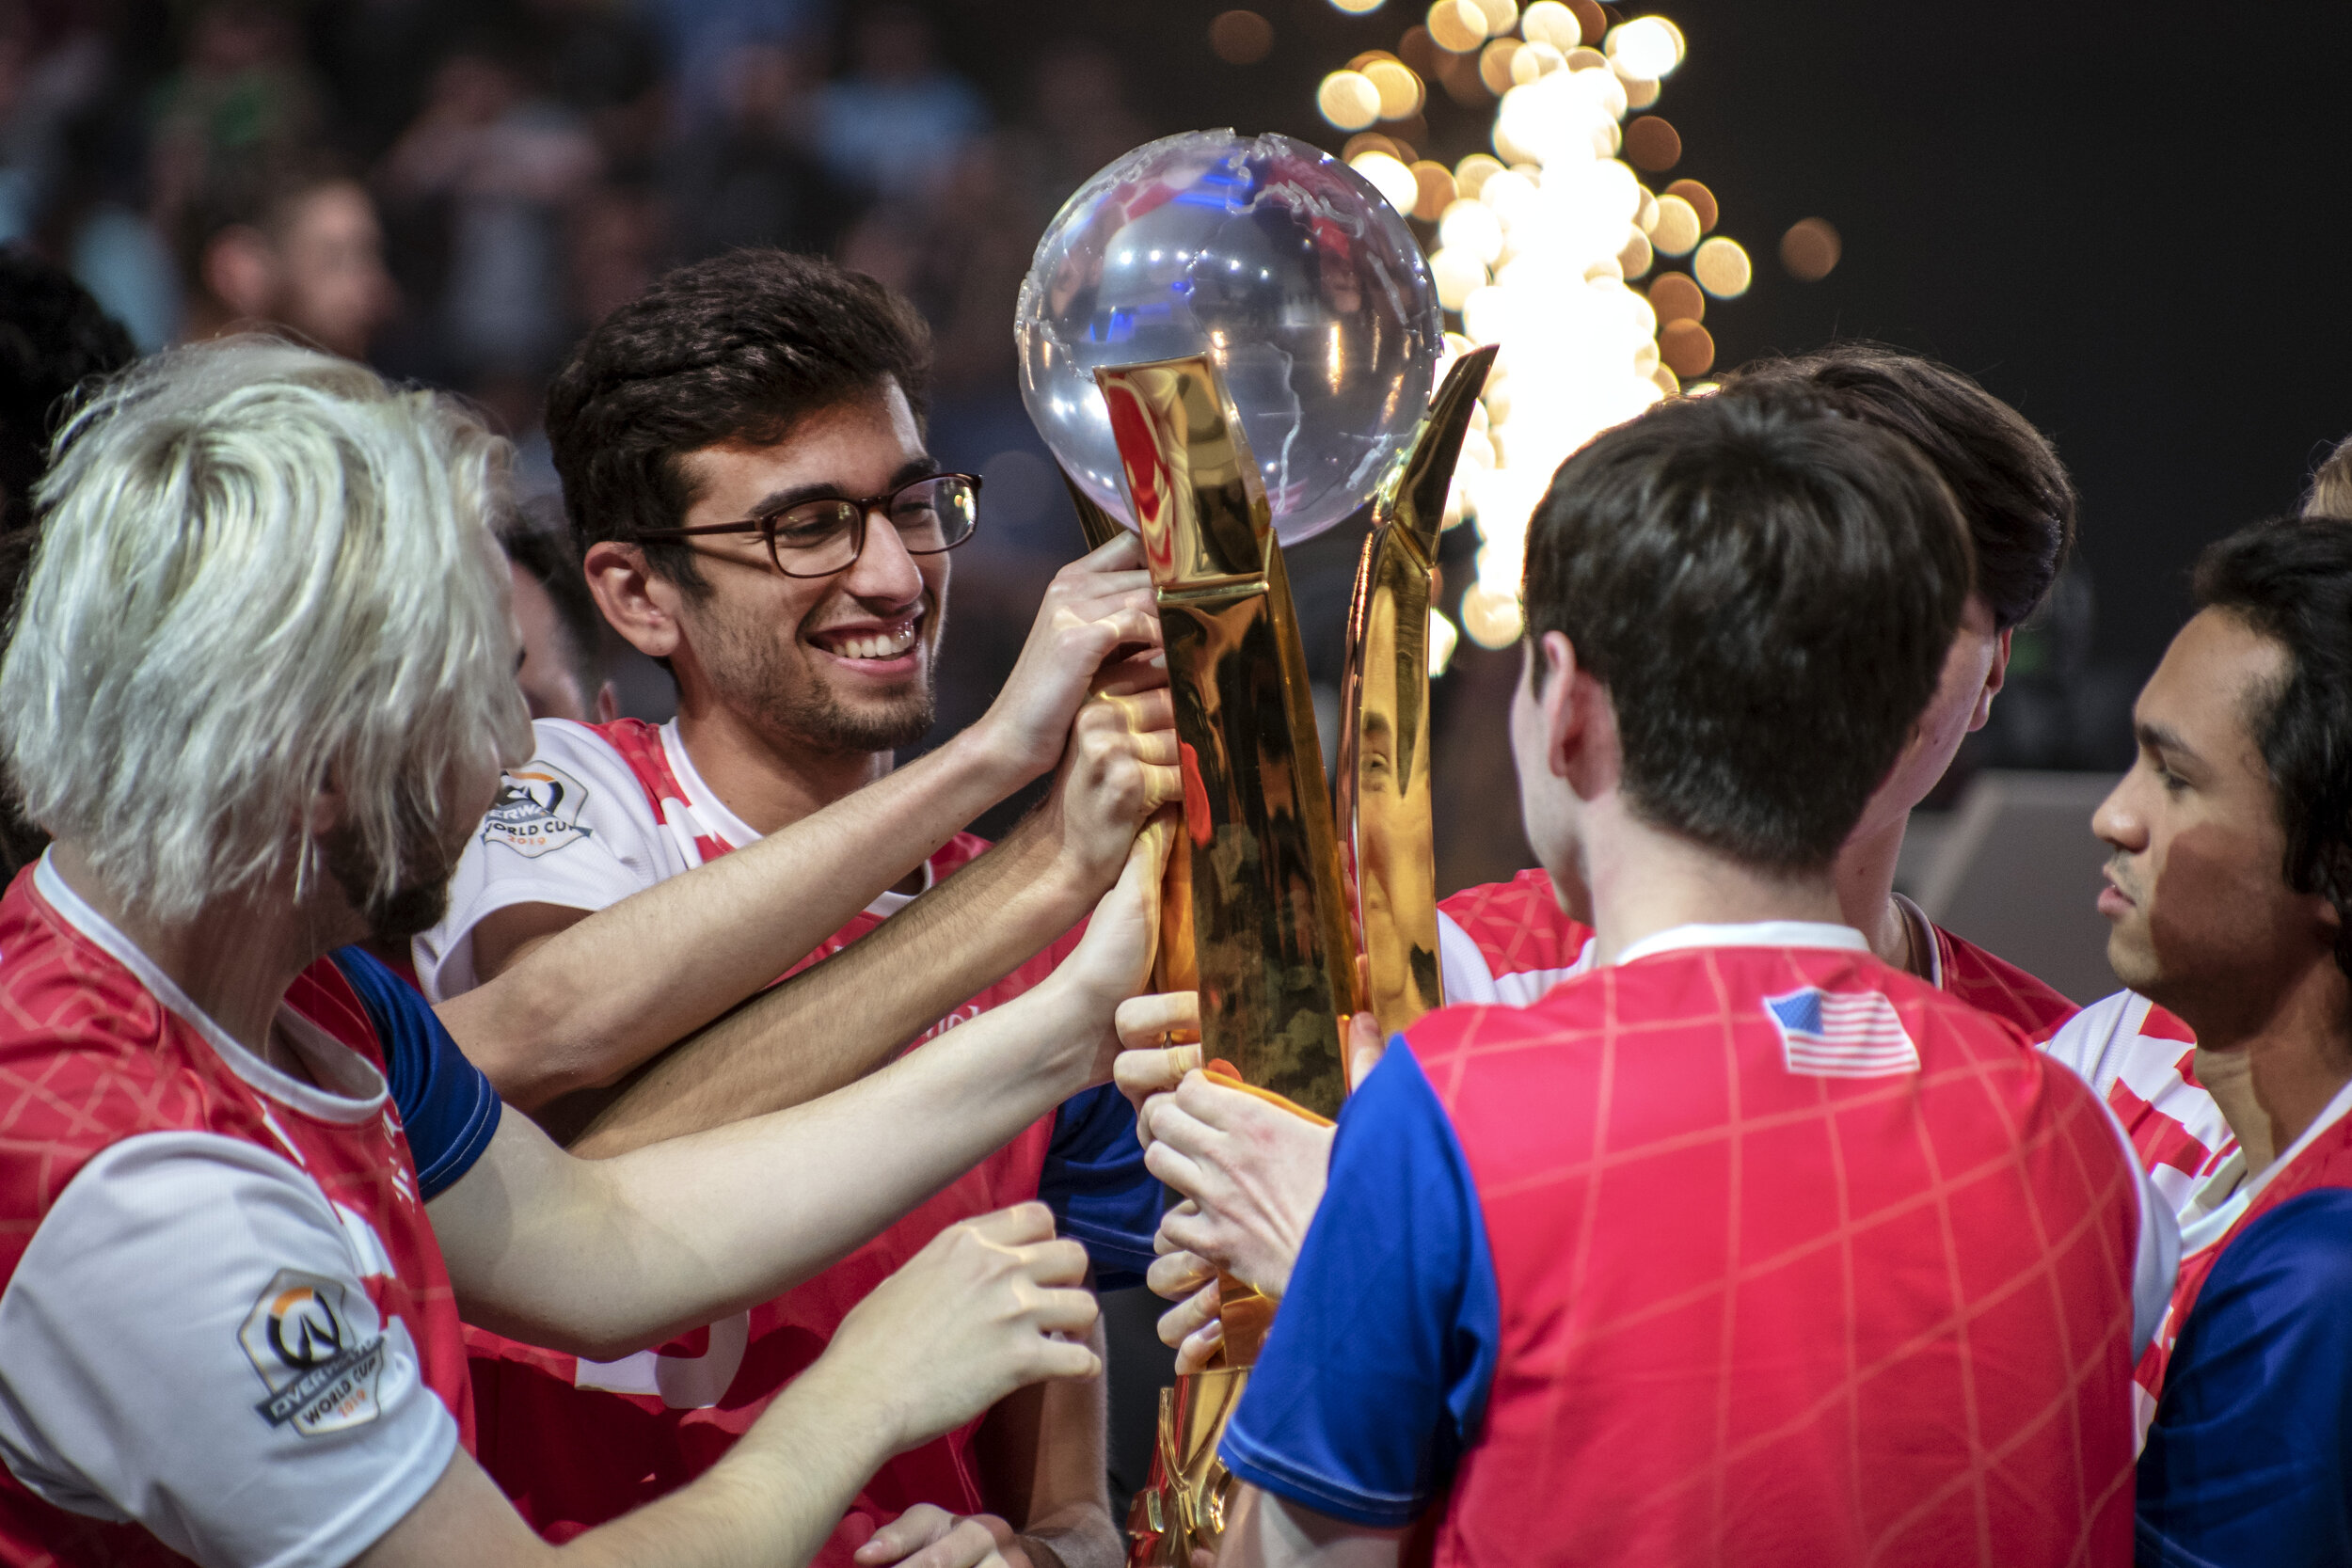 Members of Team USA Win the 2019 Overwatch World Cup